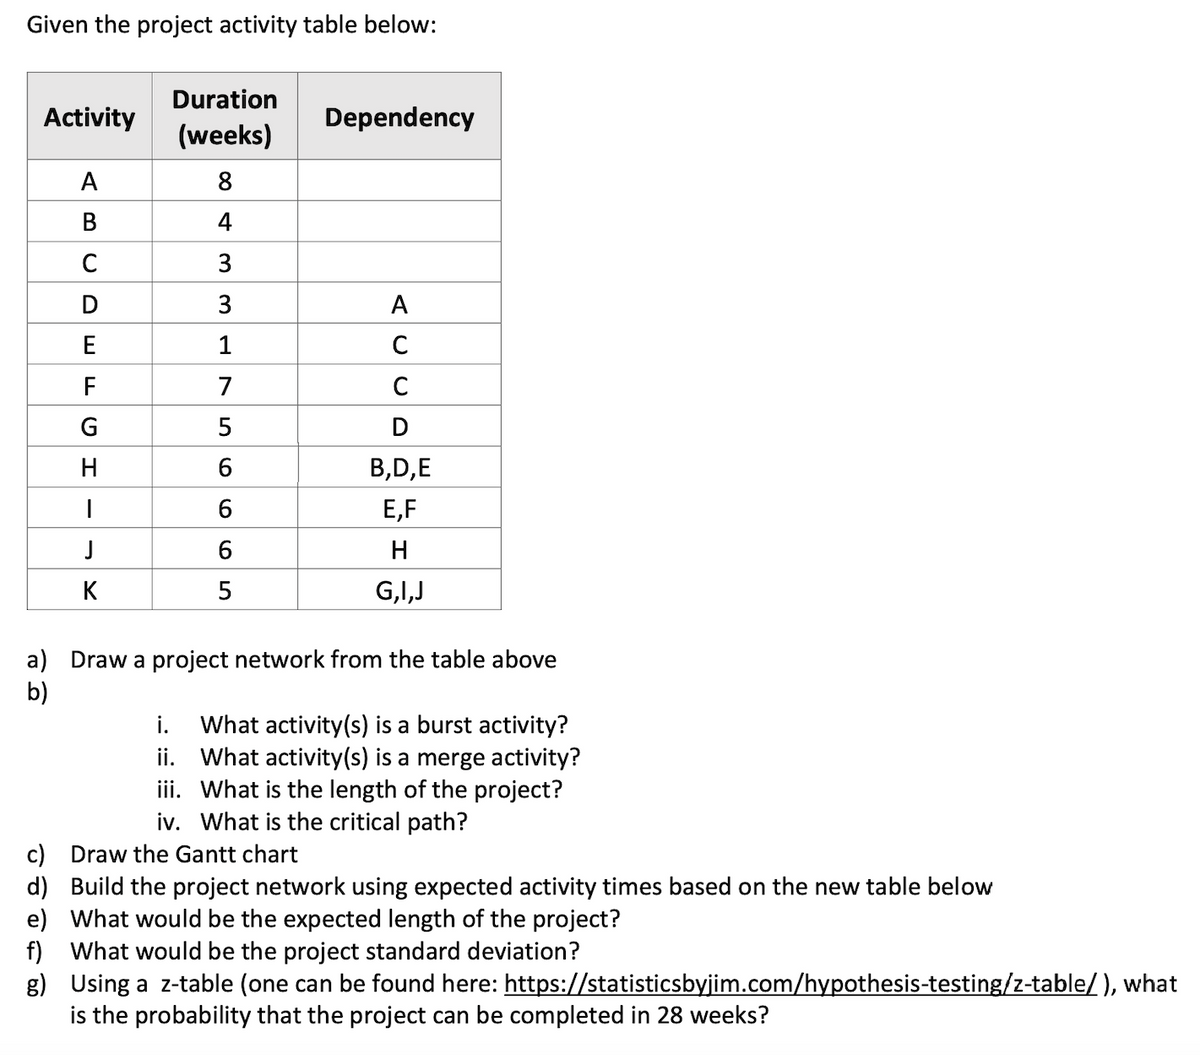 Given the project activity table below:
Activity
A
B
C
D
E
F
G
H
|
J
K
Duration
(weeks)
8
4
3
3
1
7
5
6
6
6
5
Dependency
A
C
C
D
B,D,E
E,F
H
G,I,J
a) Draw a project network from the table above
b)
i. What activity(s) is a burst activity?
ii. What activity(s) is a merge activity?
iii. What is the length of the project?
iv. What is the critical path?
c) Draw the Gantt chart
d) Build the project network using expected activity times based on the new table below
e) What would be the expected length of the project?
f) What would be the project standard deviation?
g)
Using a z-table (one can be found here: https://statisticsbyjim.com/hypothesis-testing/z-table/), what
is the probability that the project can be completed in 28 weeks?